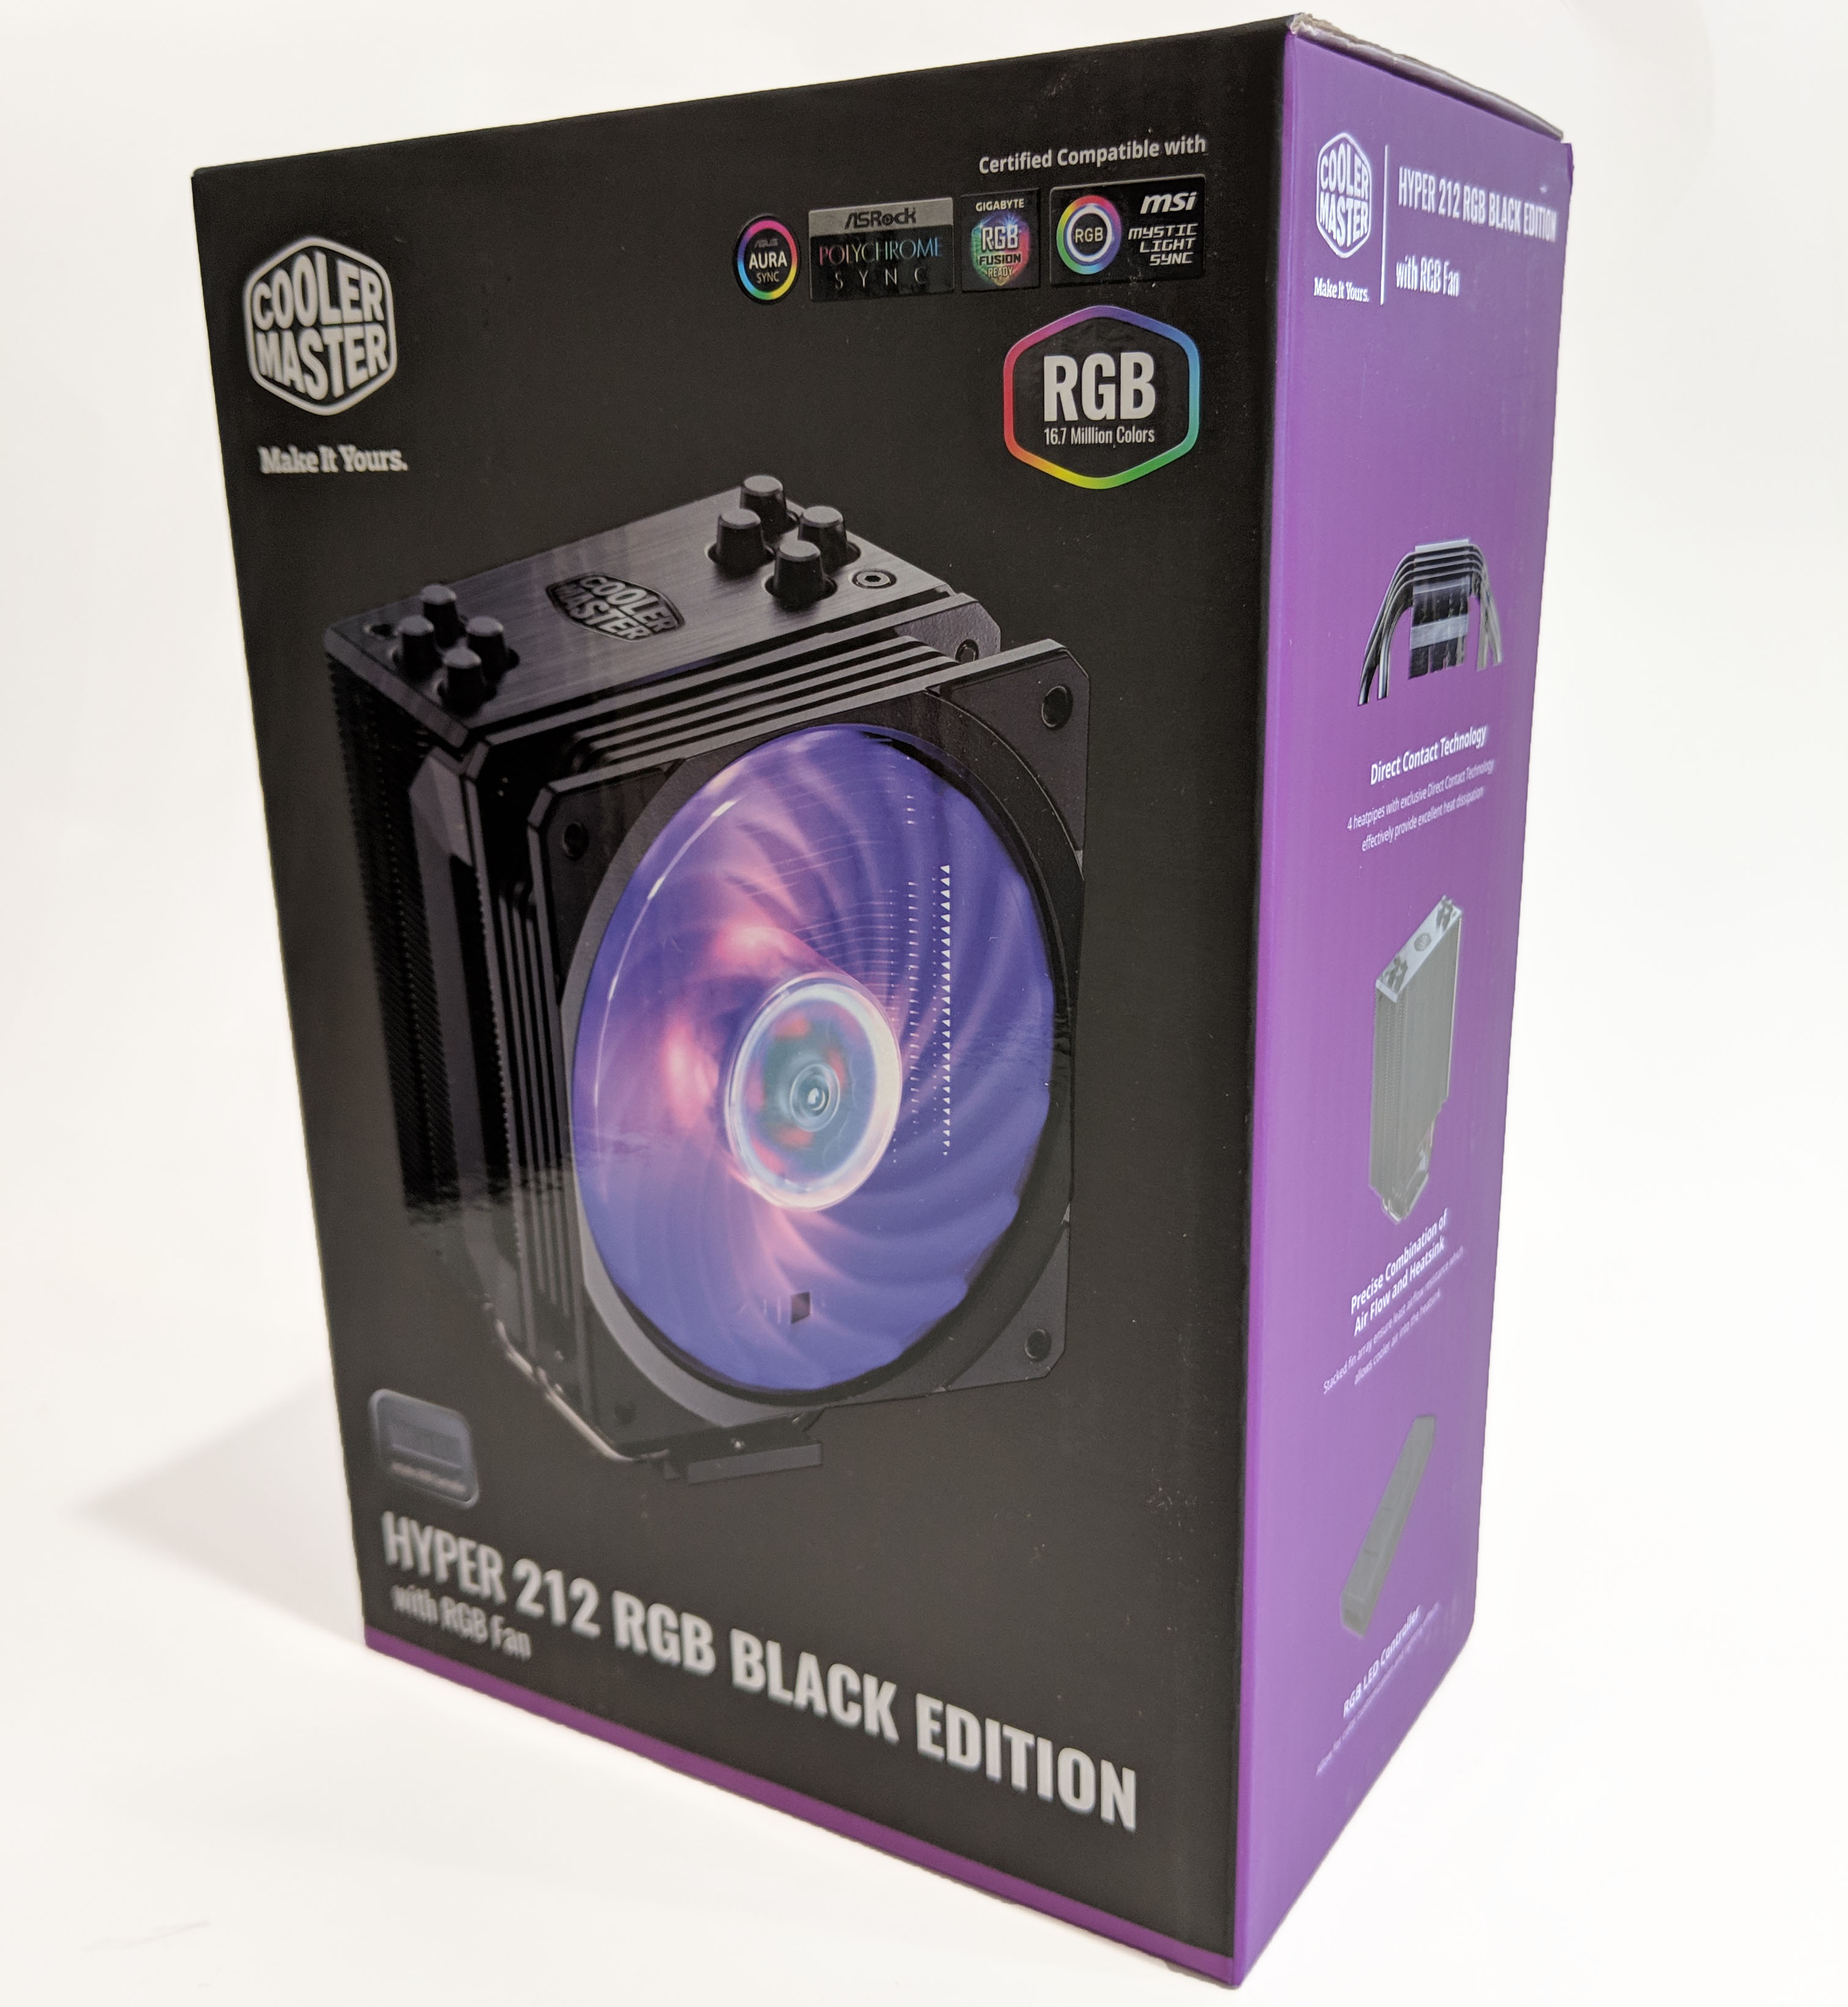 Cooler Master Hyper 212 RGB Black Edition Review - Old friend in a new  guise